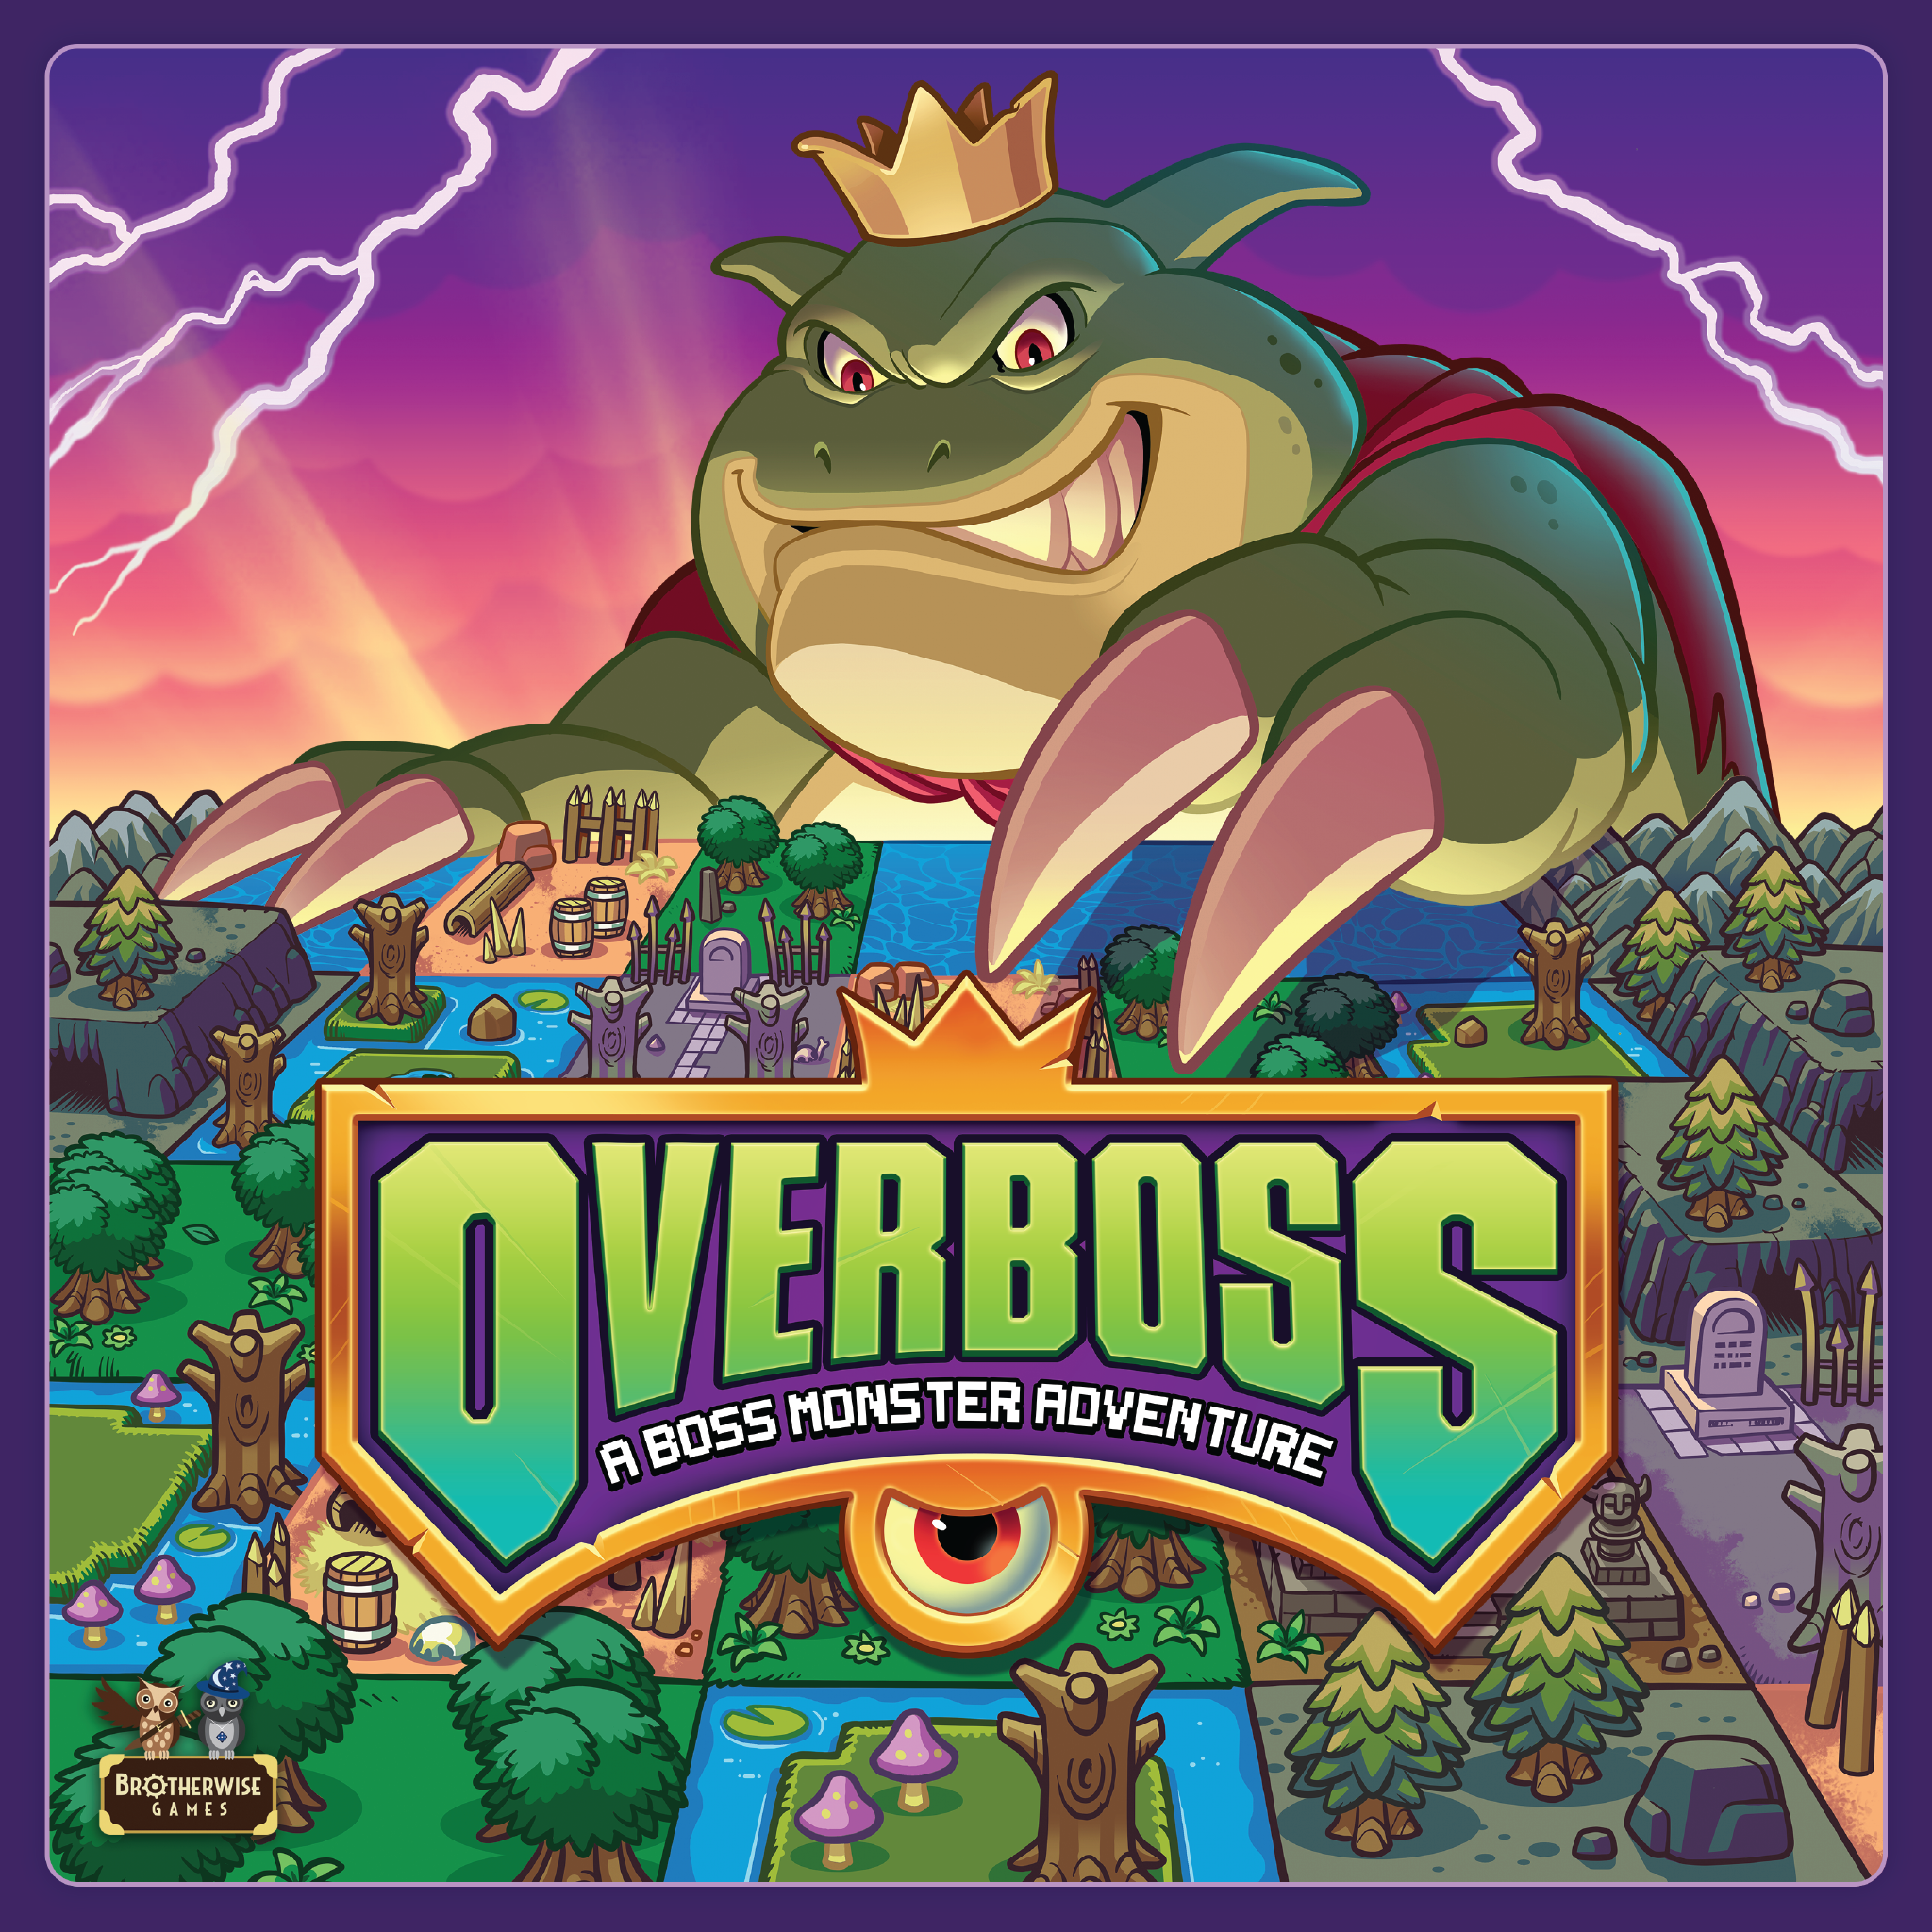 Overboss (Brotherwise Games)